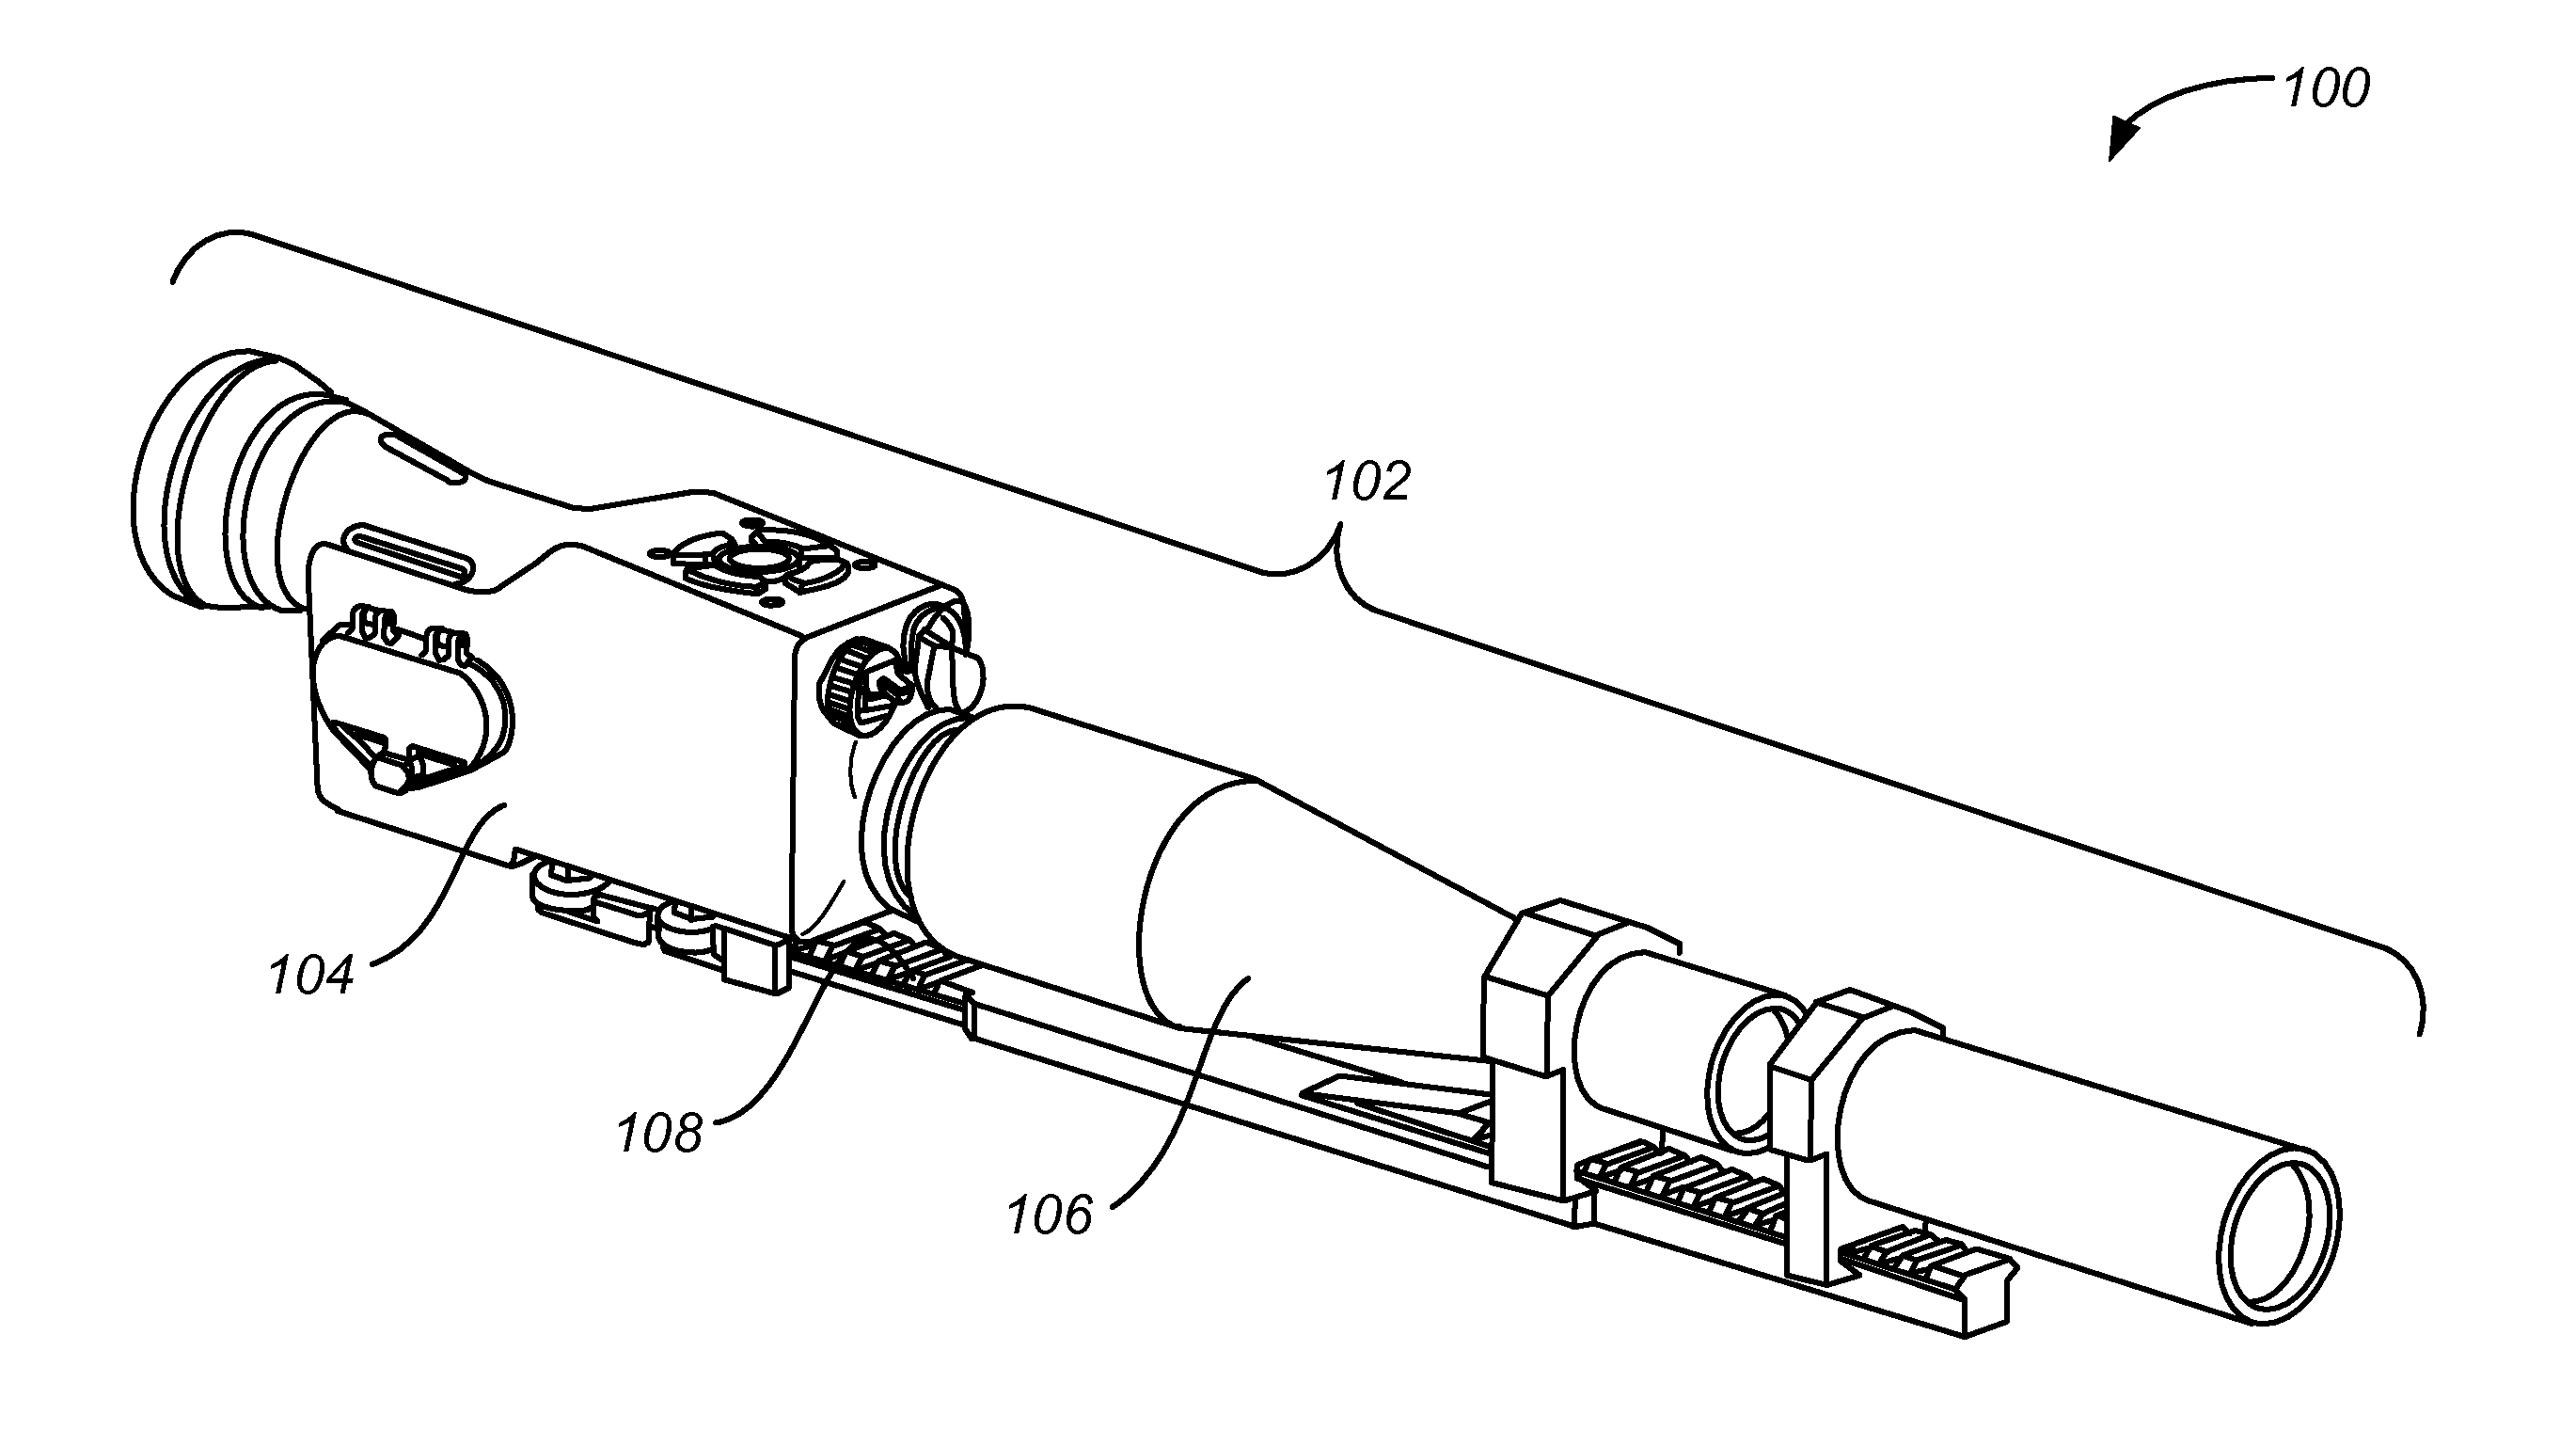 Method and apparatus for absorbing shock in an optical system